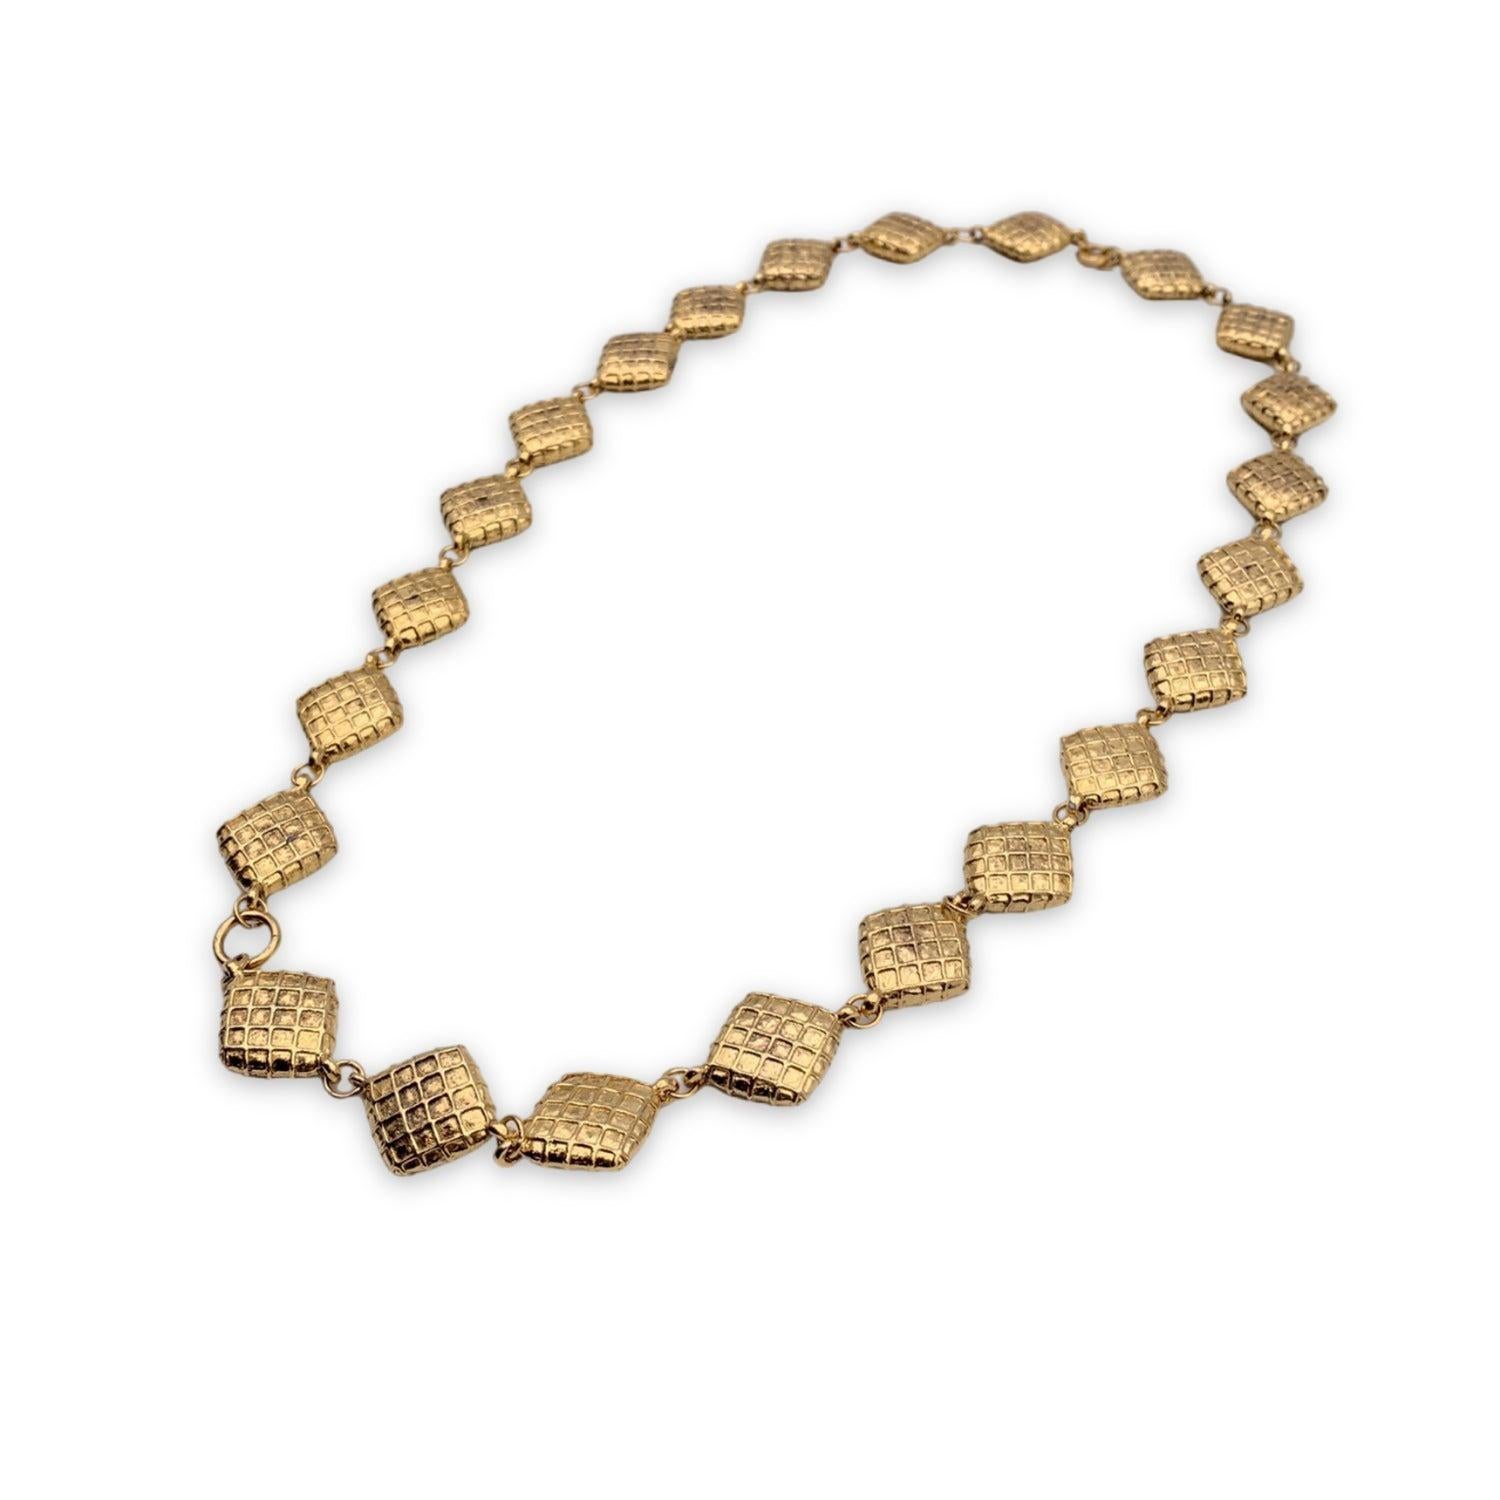 Vintage gold metal chain necklace from CHANEL. It features diamond-shaped elements with quilted pattern. No closure. Necklace drop: 12.5 inches - 31.7 cm. 'CHANEL - CC - Made in France' round tab Condition A - EXCELLENT Gently used. Chanel box